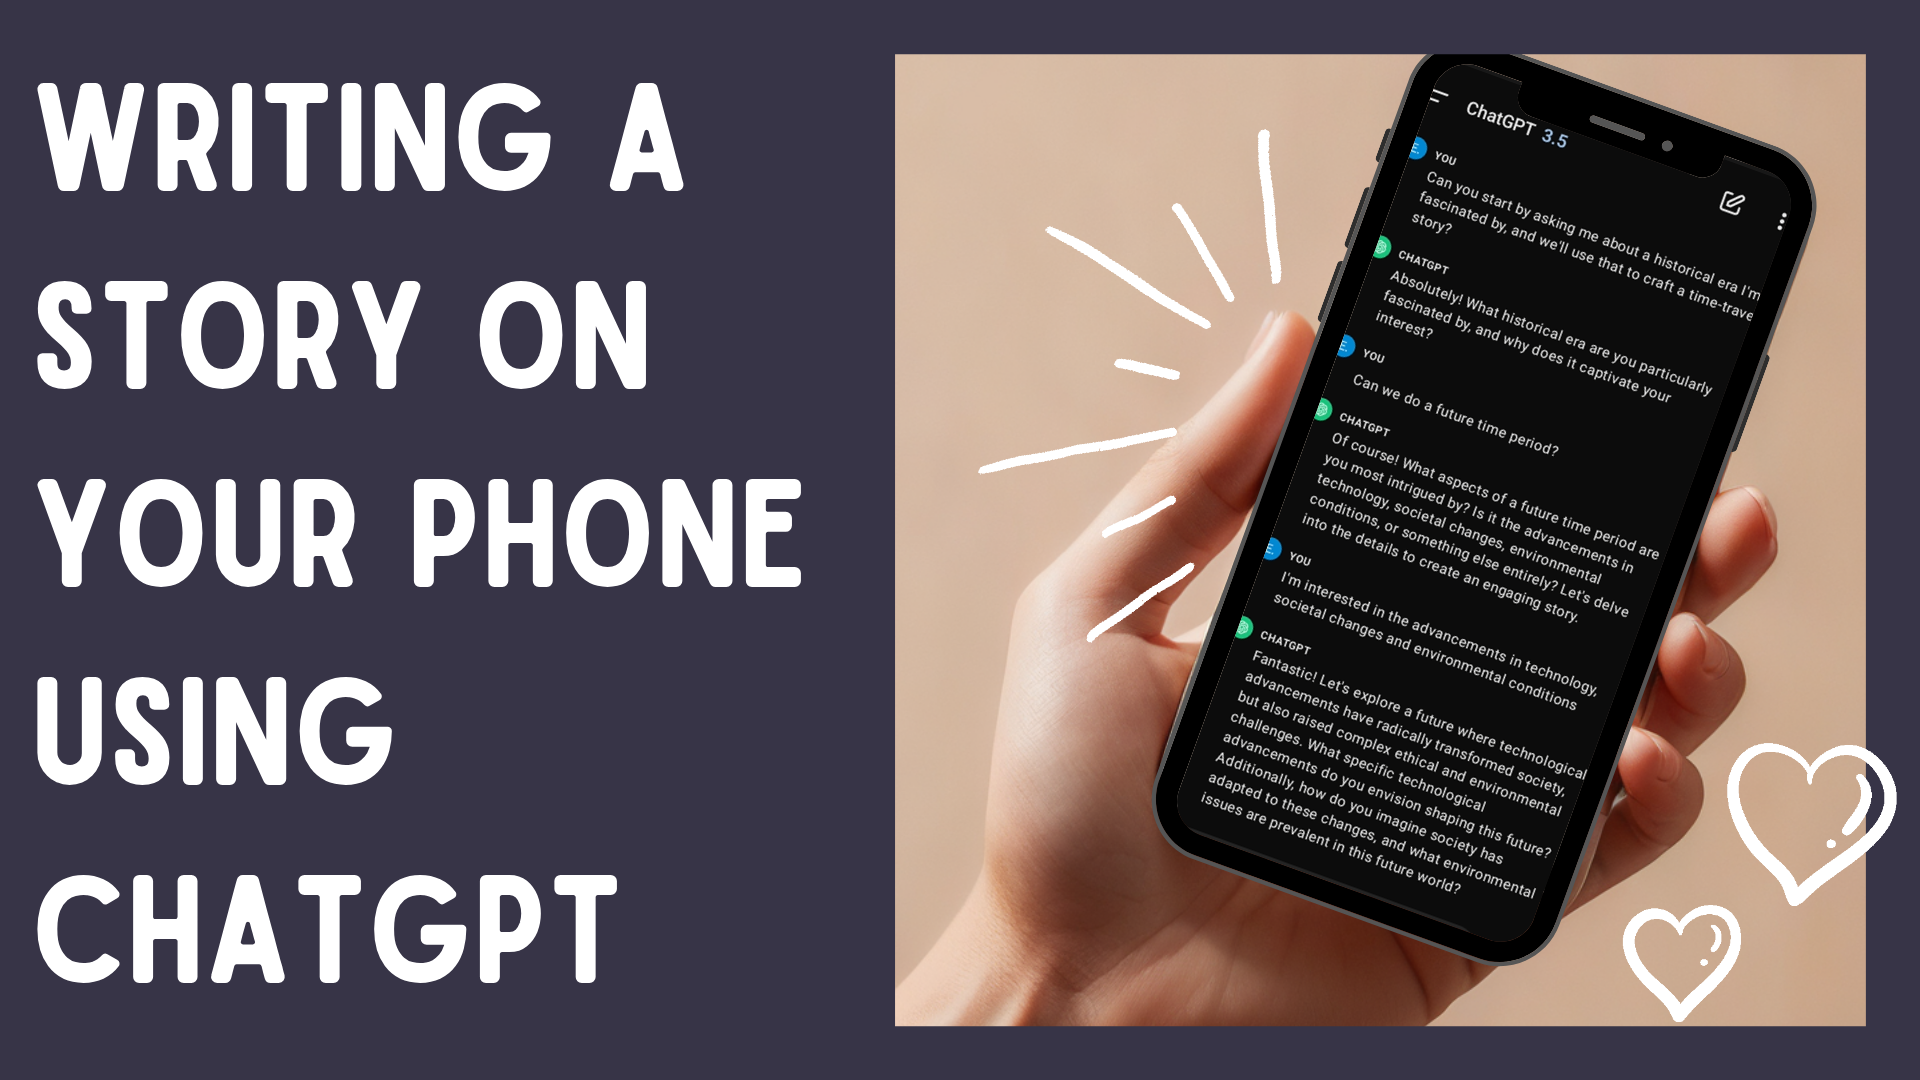 001 - Writing a Story on Your Phone Using ChatGPT